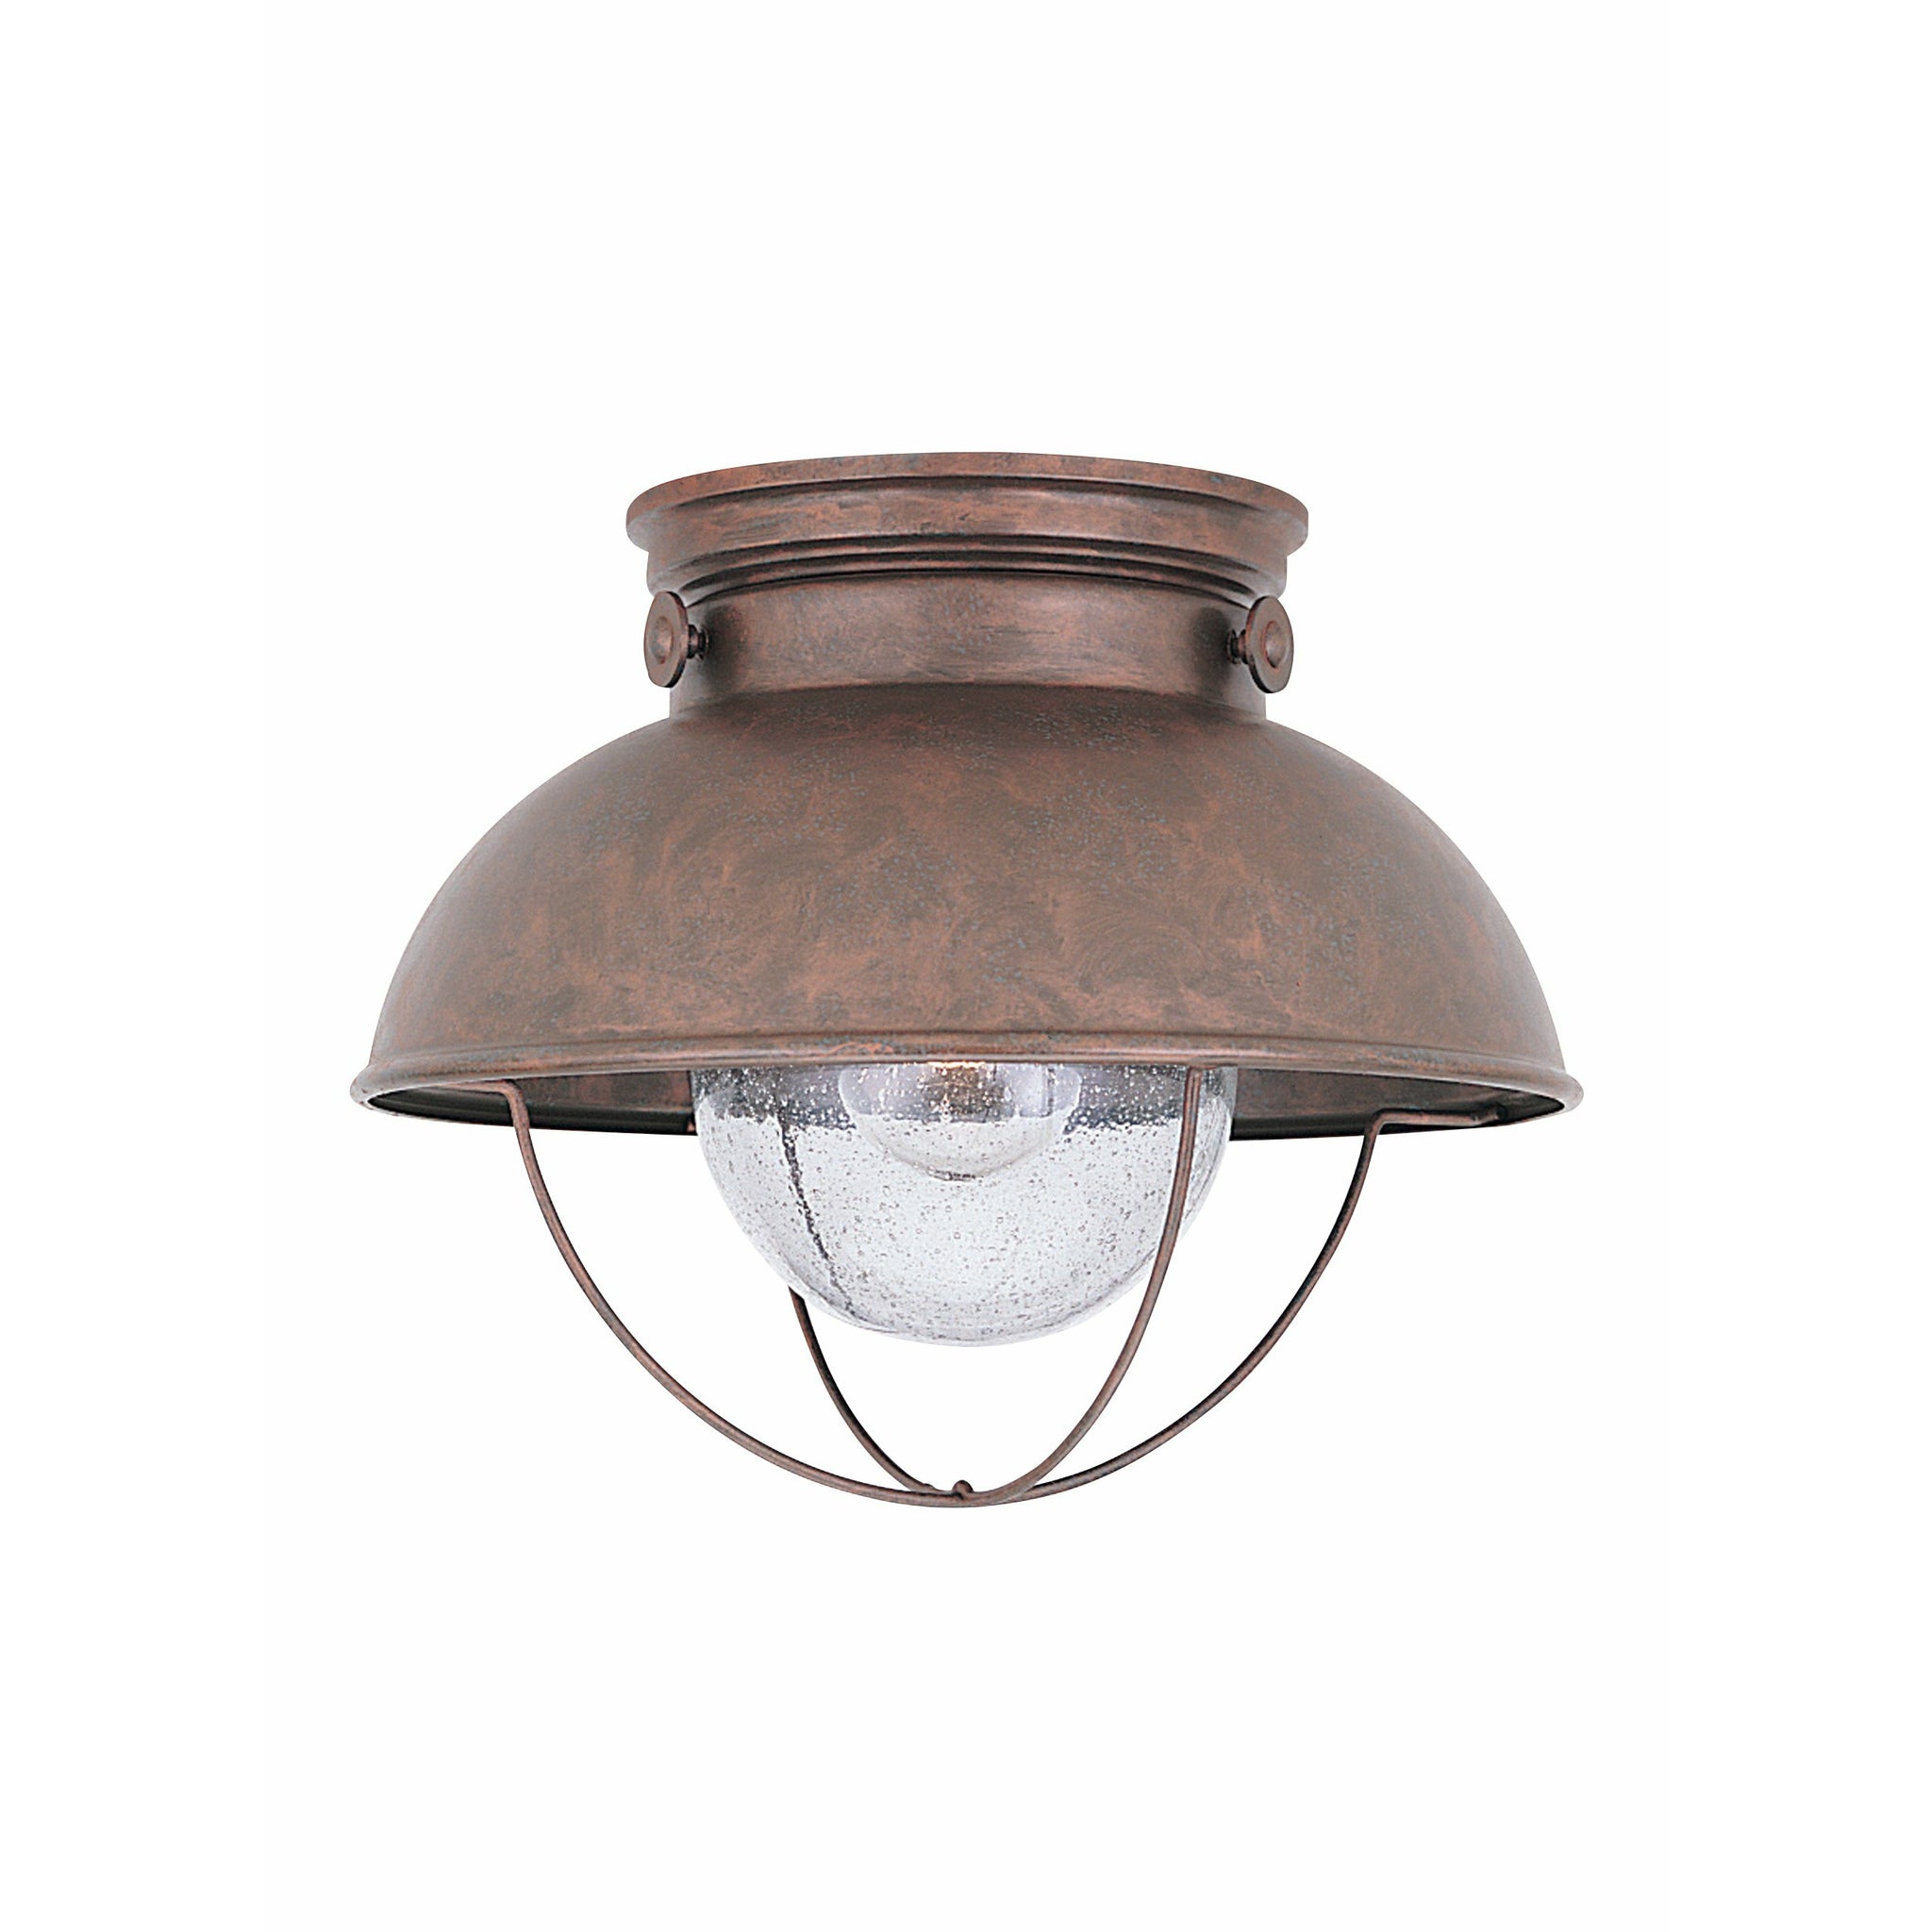 Sebring Outdoor Ceiling Light Weathered Copper